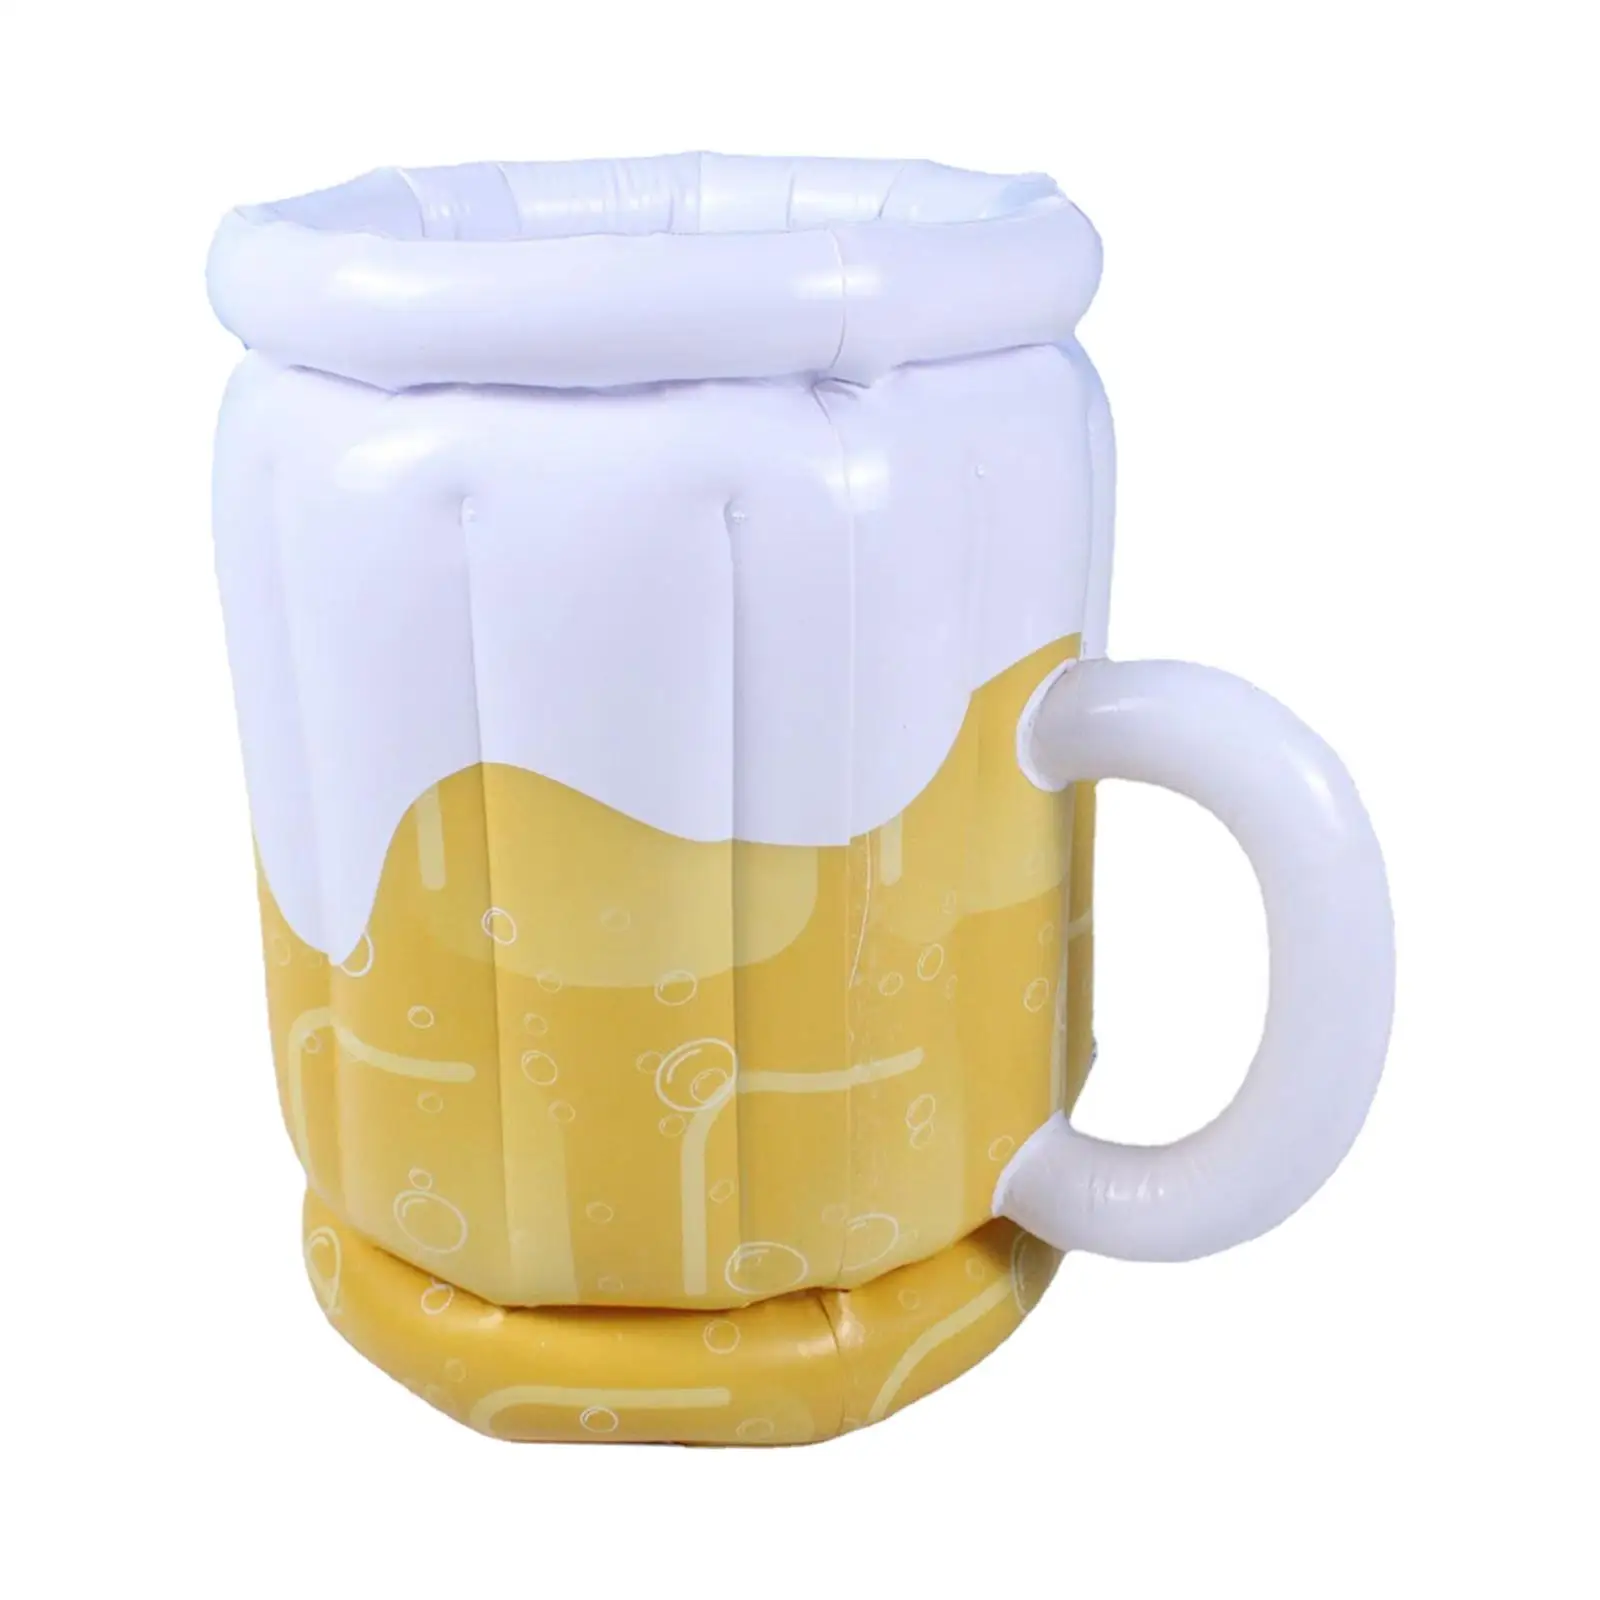 Inflatable Beer Mug Cooler Buffet Cooler Beer Mug Cooler Ice Bucket Cooler for Pool Party Decorations Beach BBQ Outdoor Camping